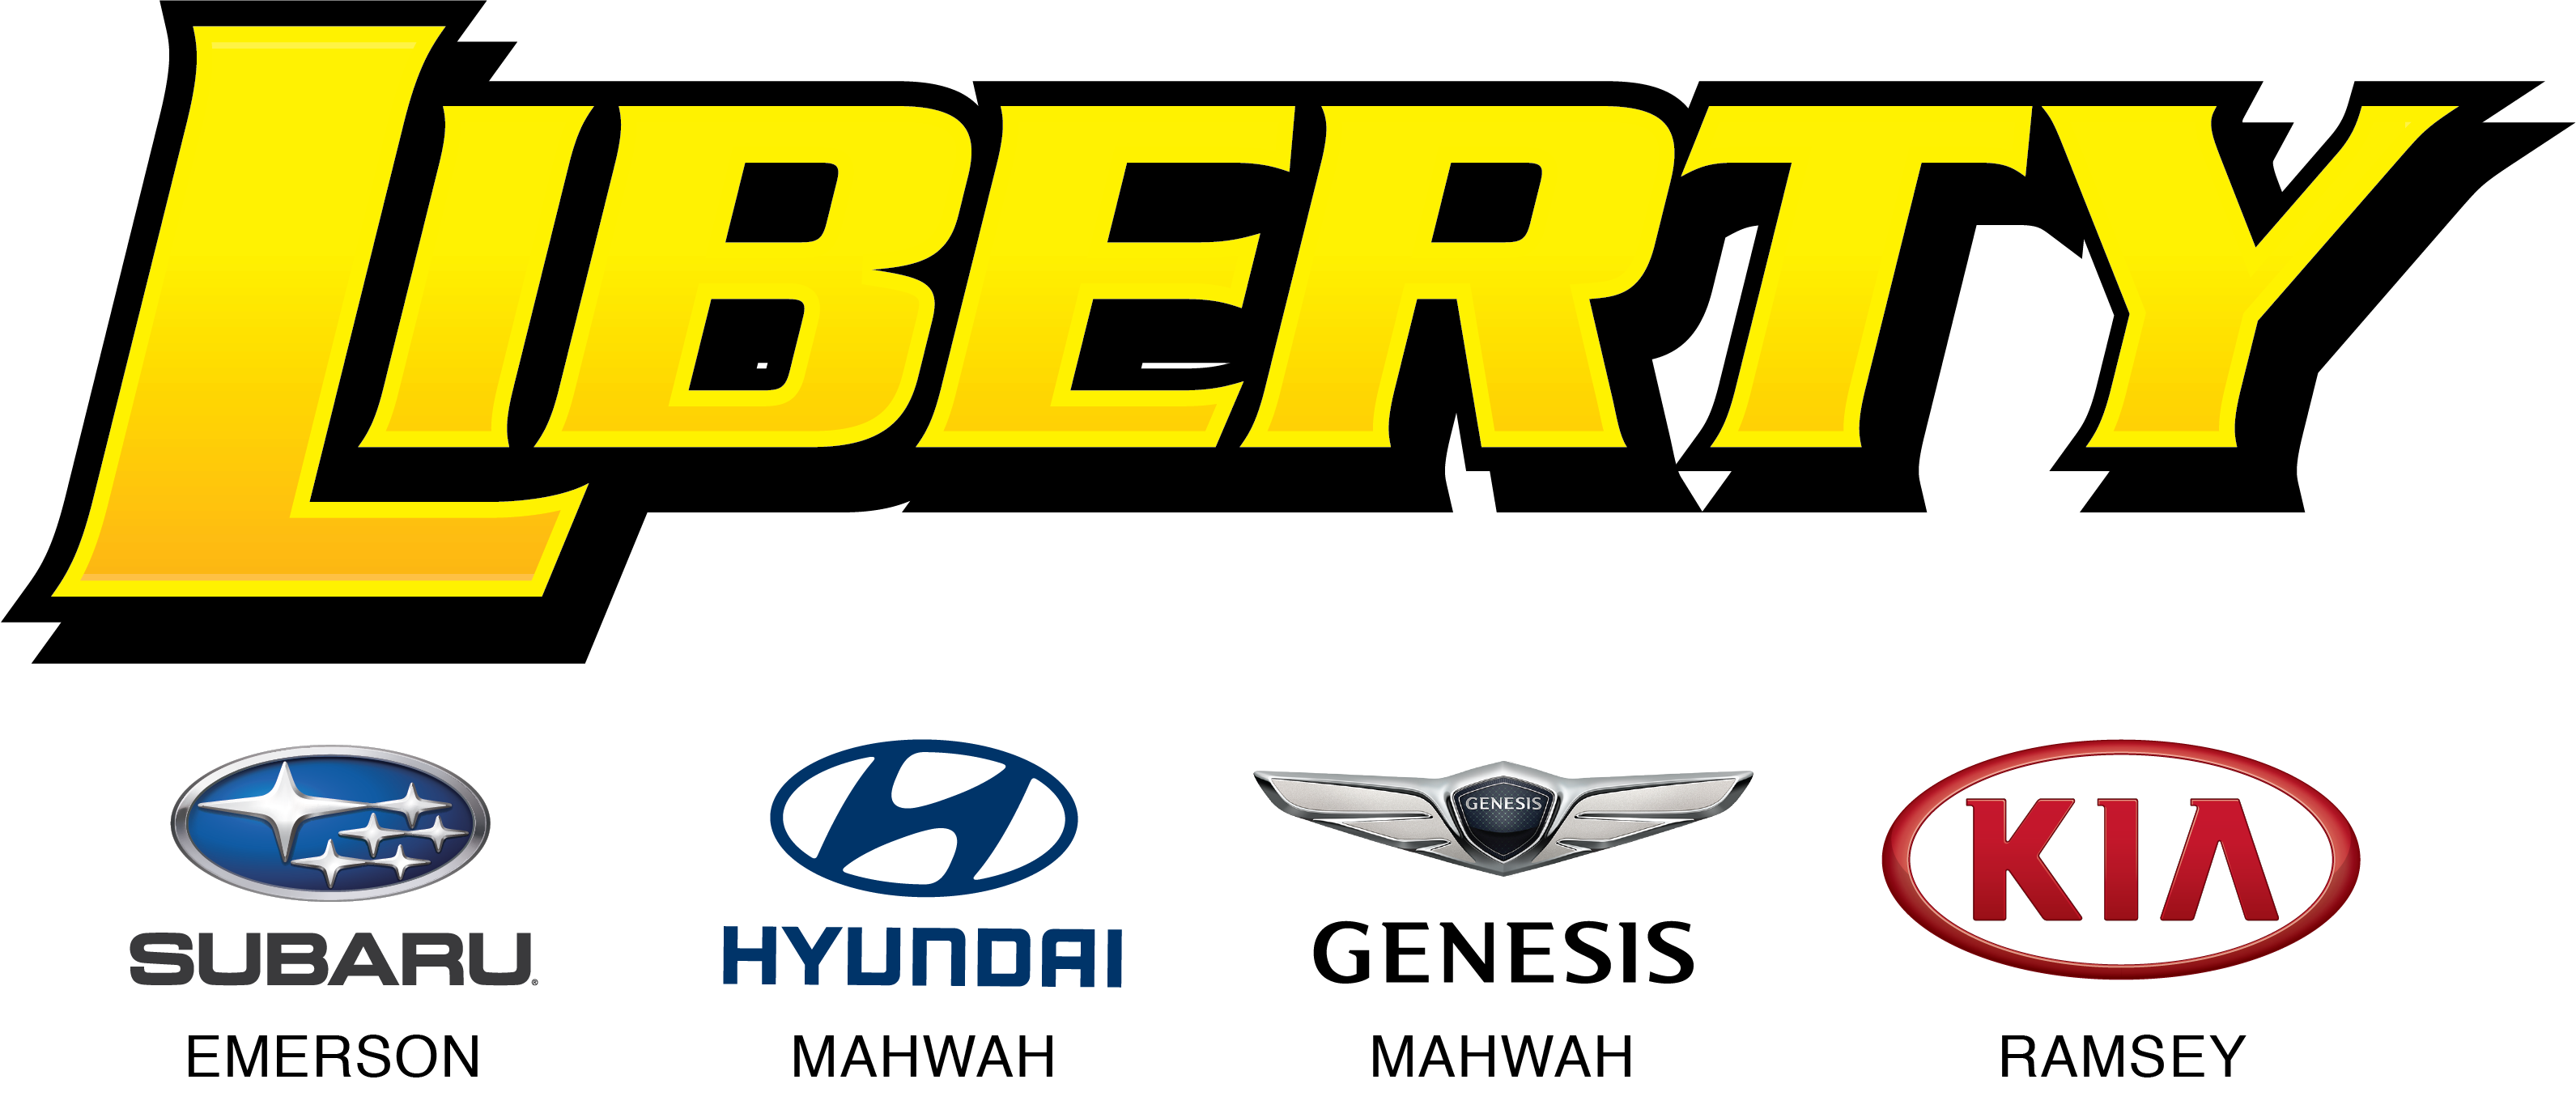 Liberty Family of Dealerships. Photo by Liberty Family of Dealerships.